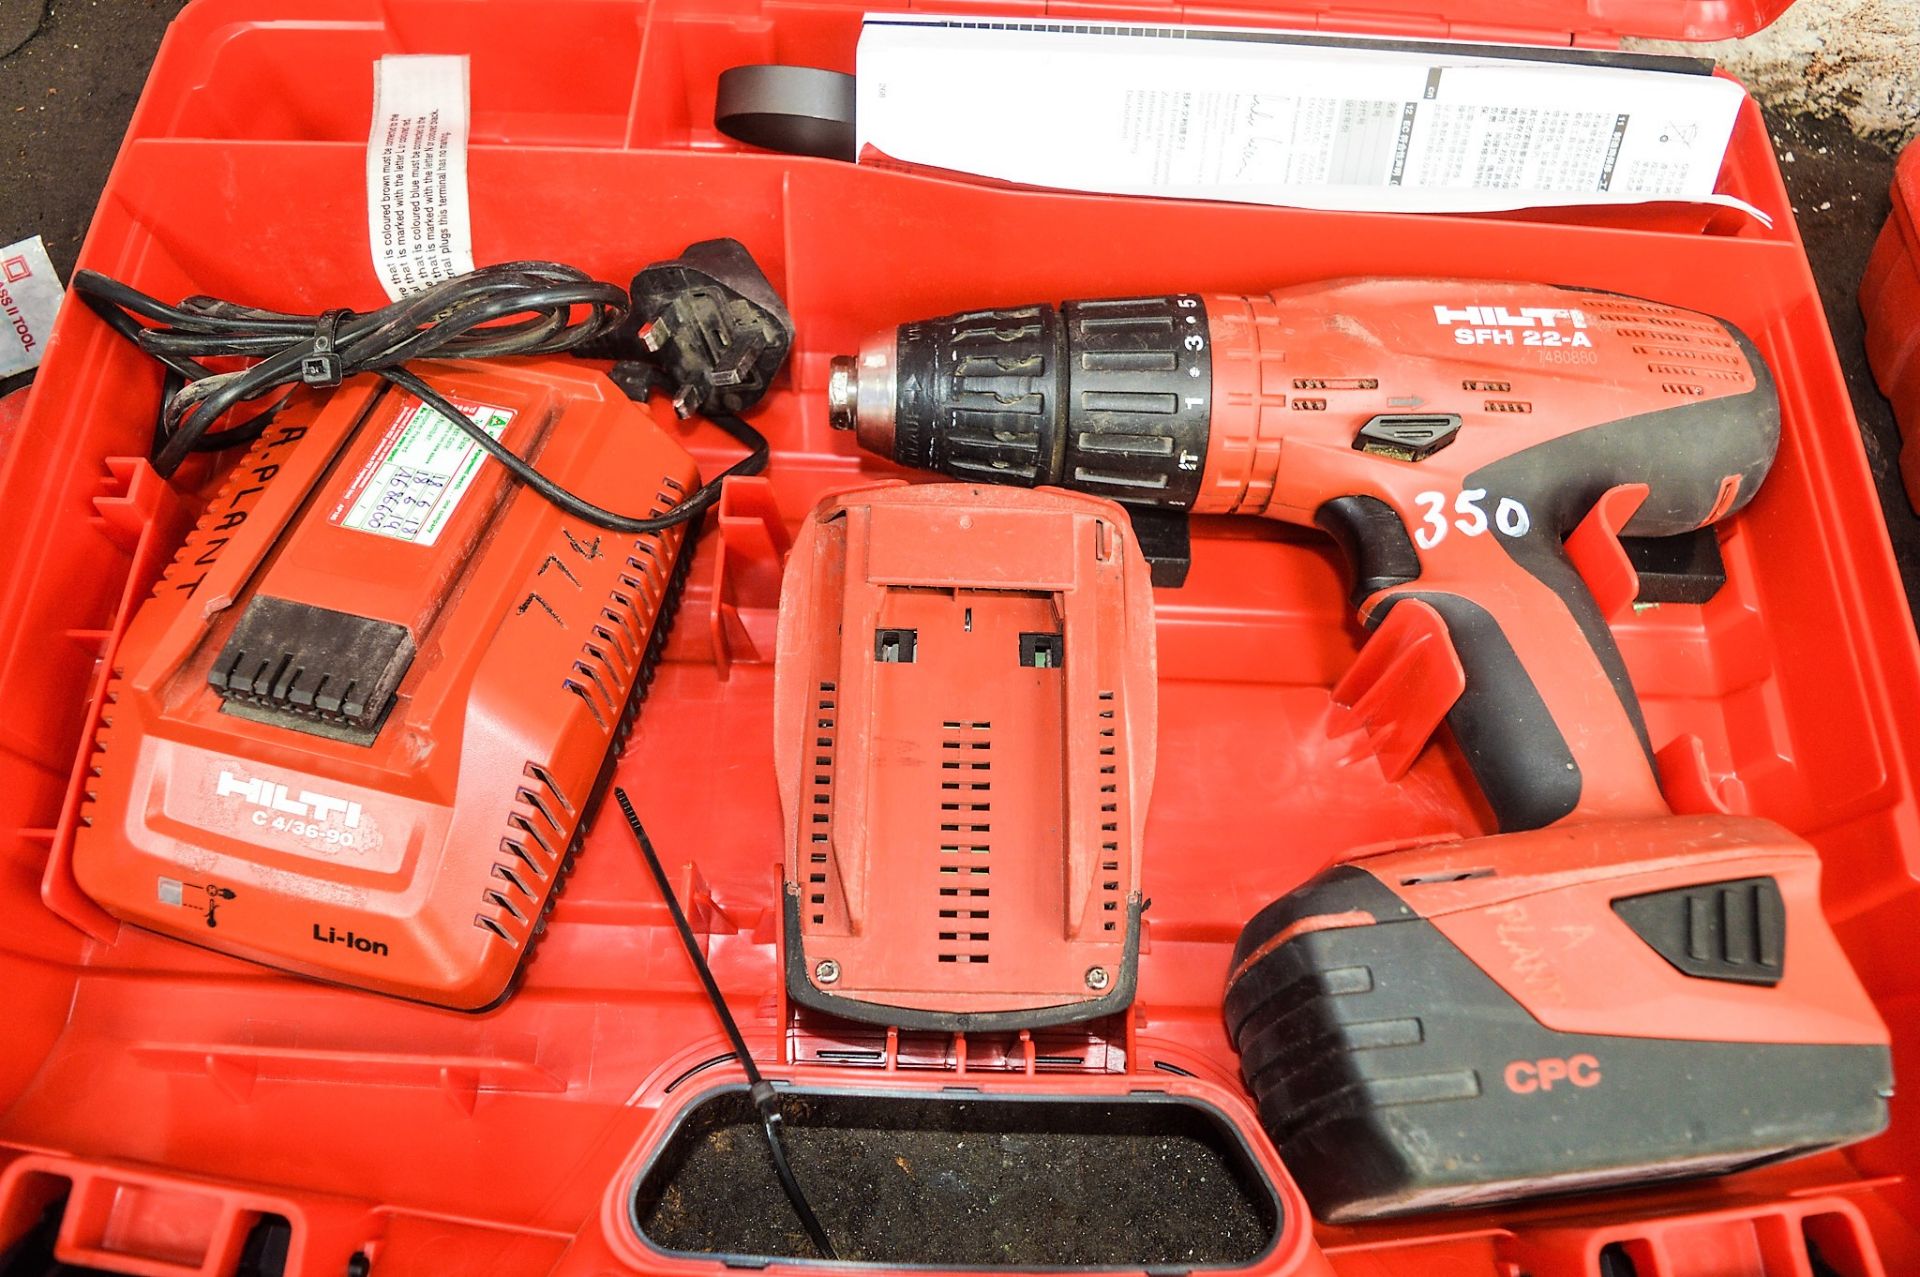 Hilti SFH22-A 22v cordless power drill c/w charger, 2 batteries & carry case A686600